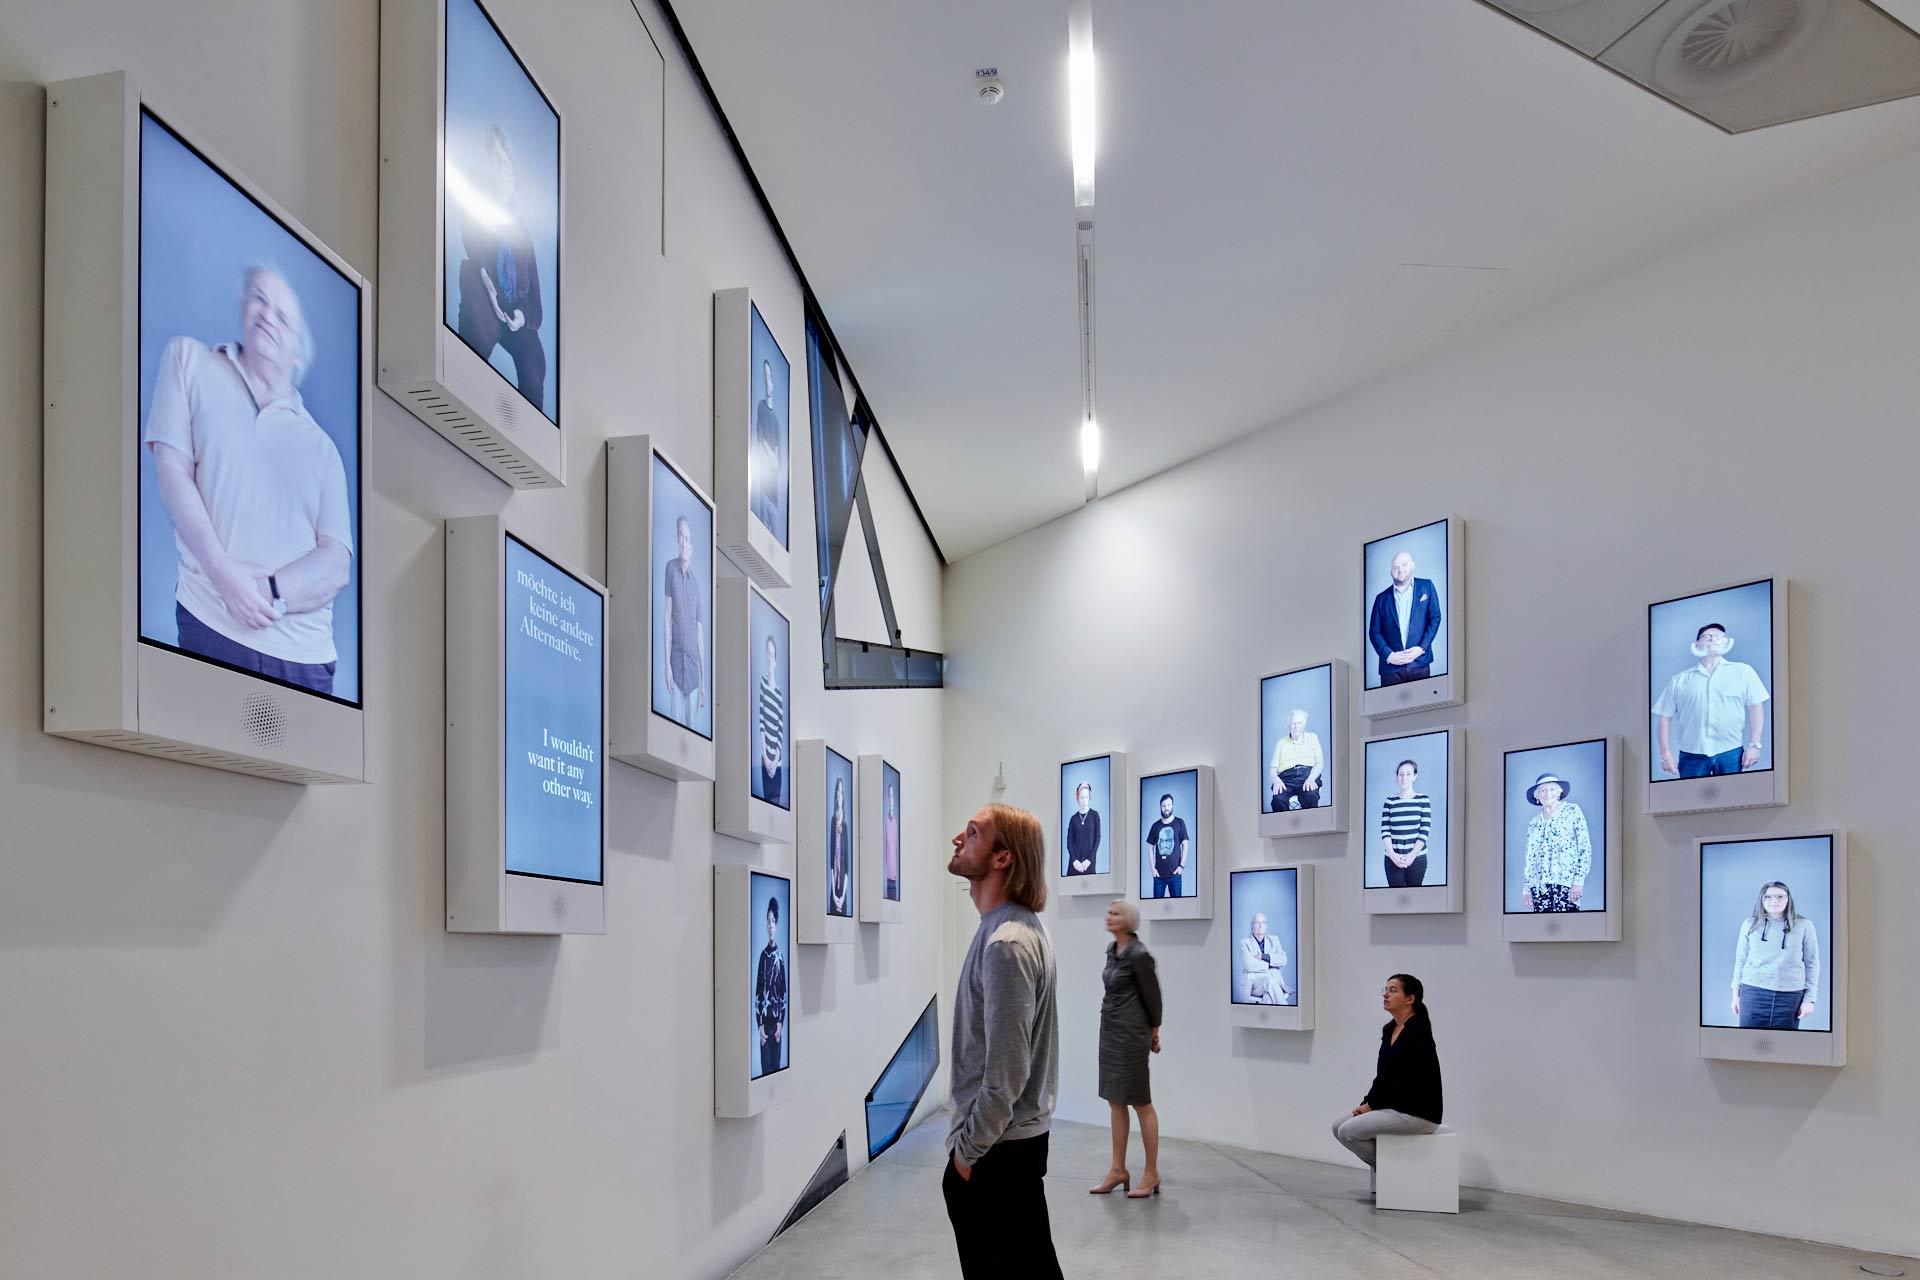 Visitors in an exhibition room with screens scattered along the walls showing videos of various people